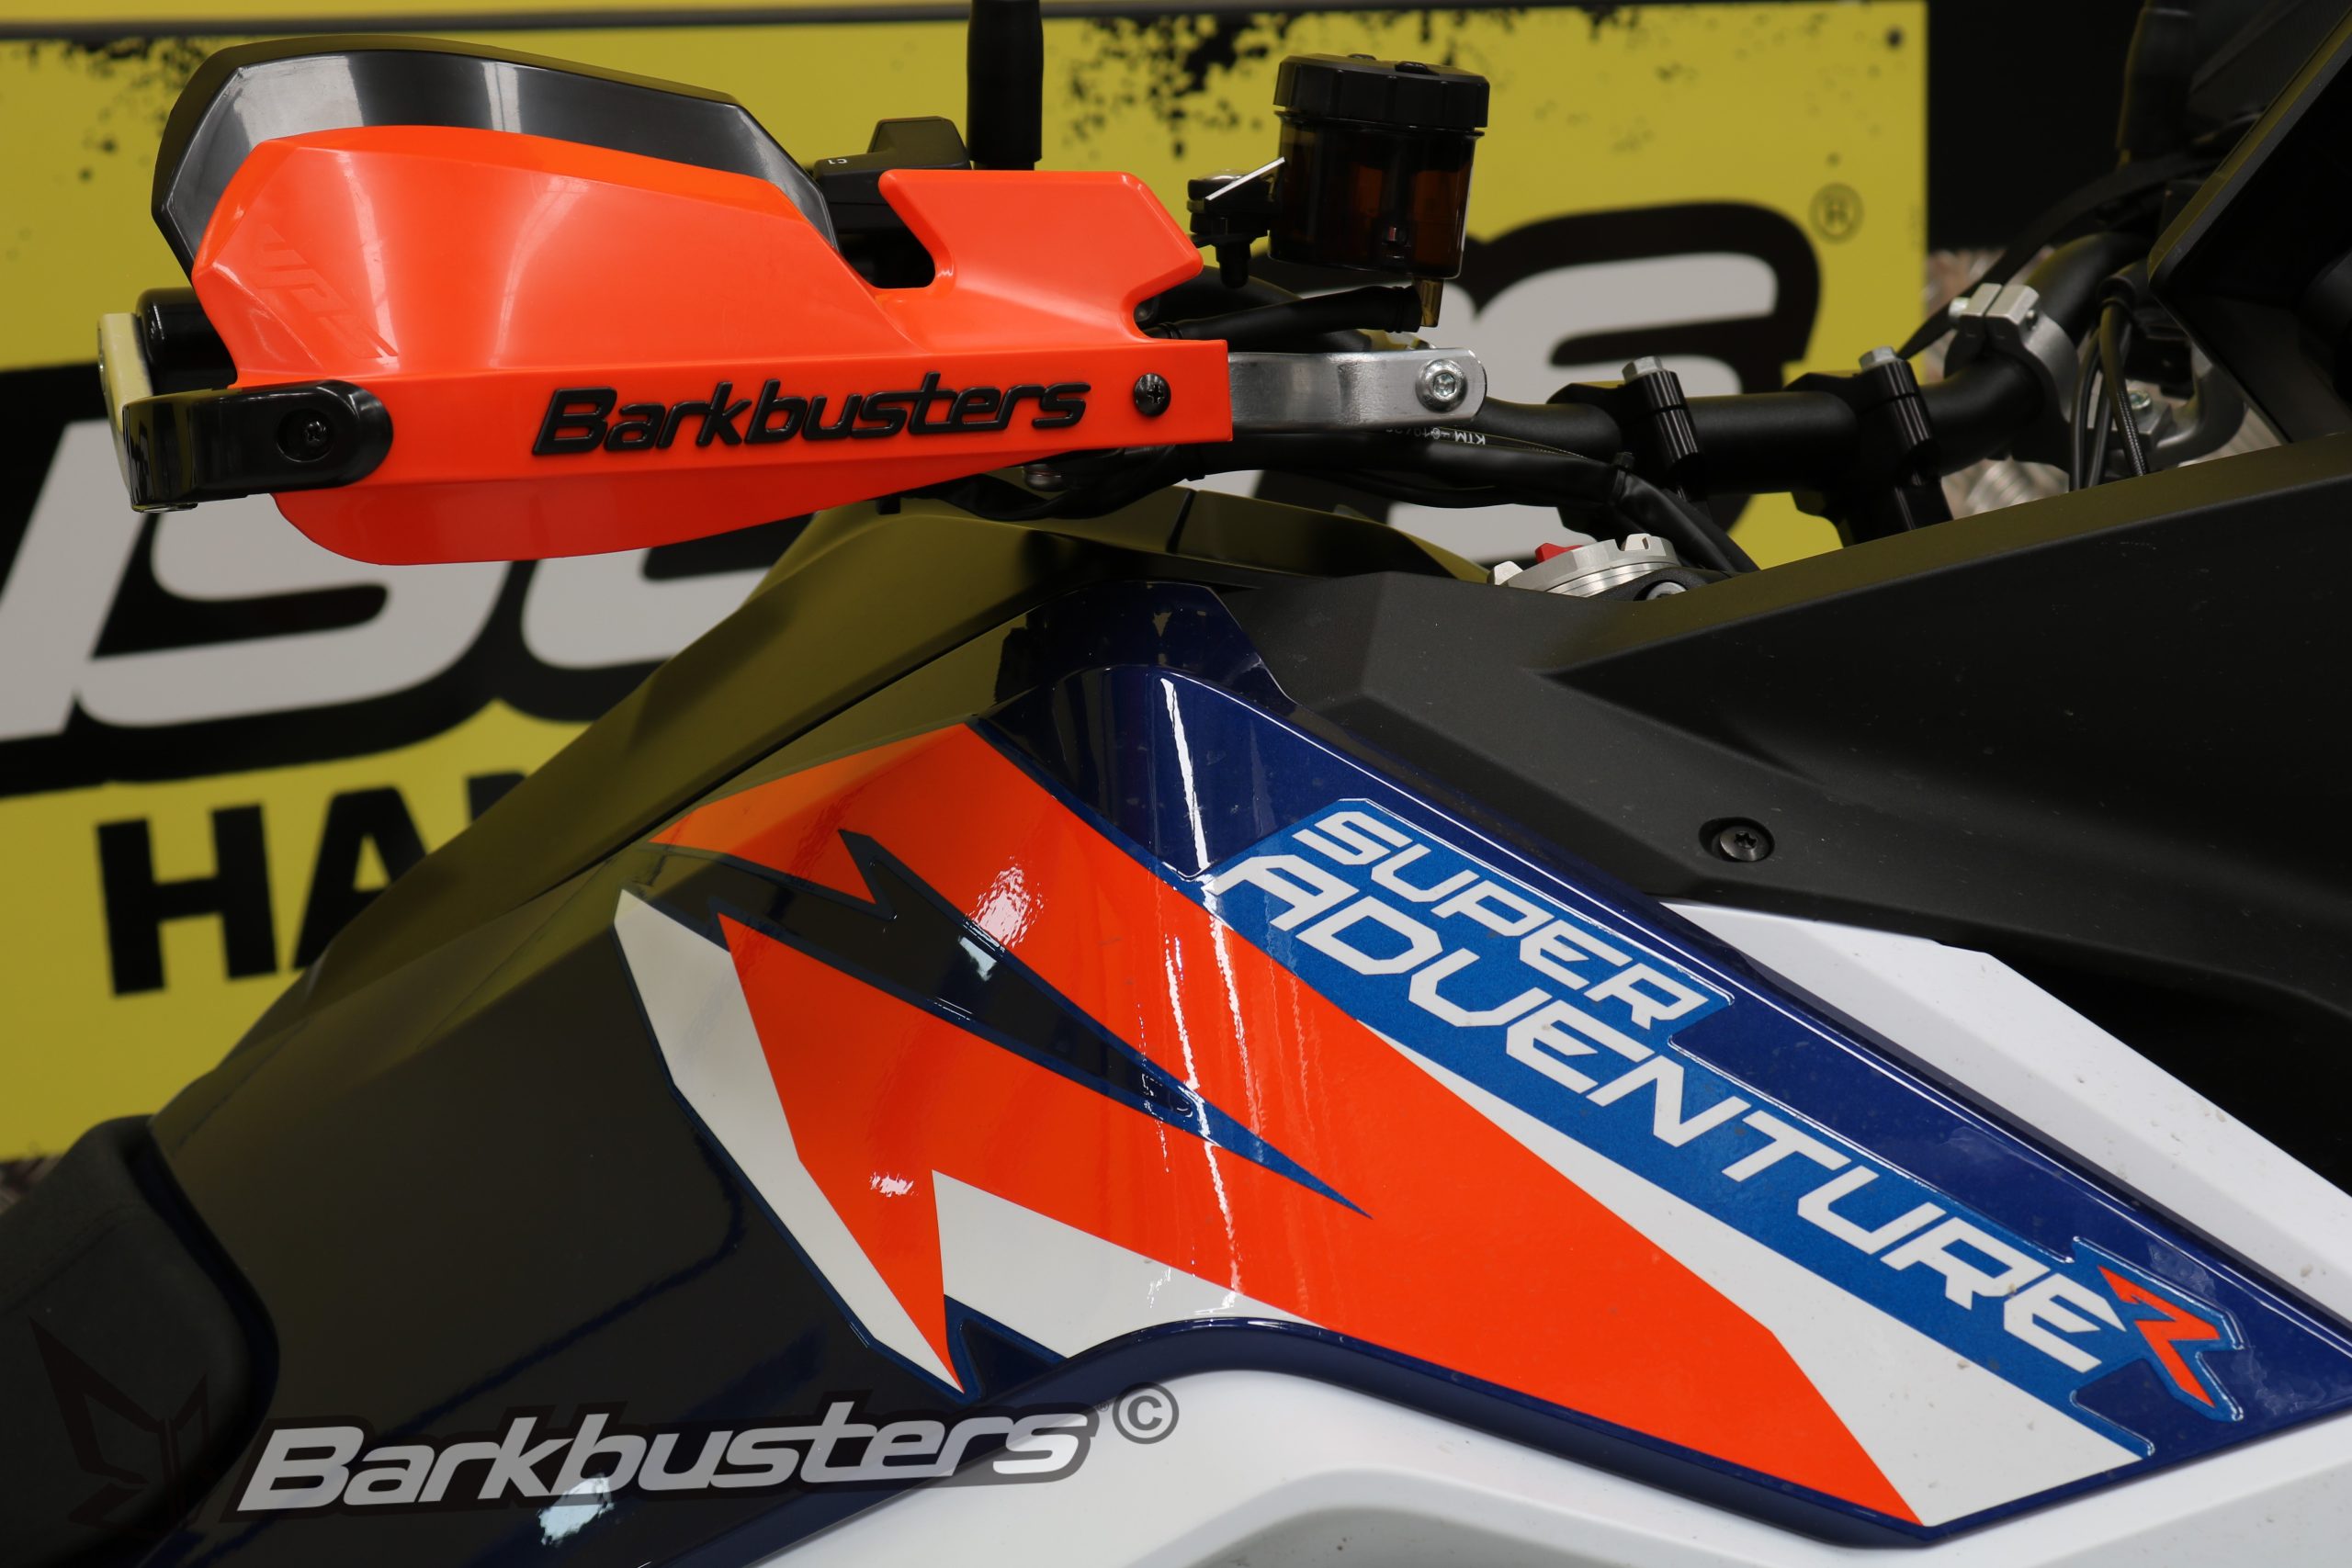 BARKBUSTERS Handguard Hardware Kit (Code: BHG-107-00) fitted to KTM SUPER ADVENTURE R with VPS Guards